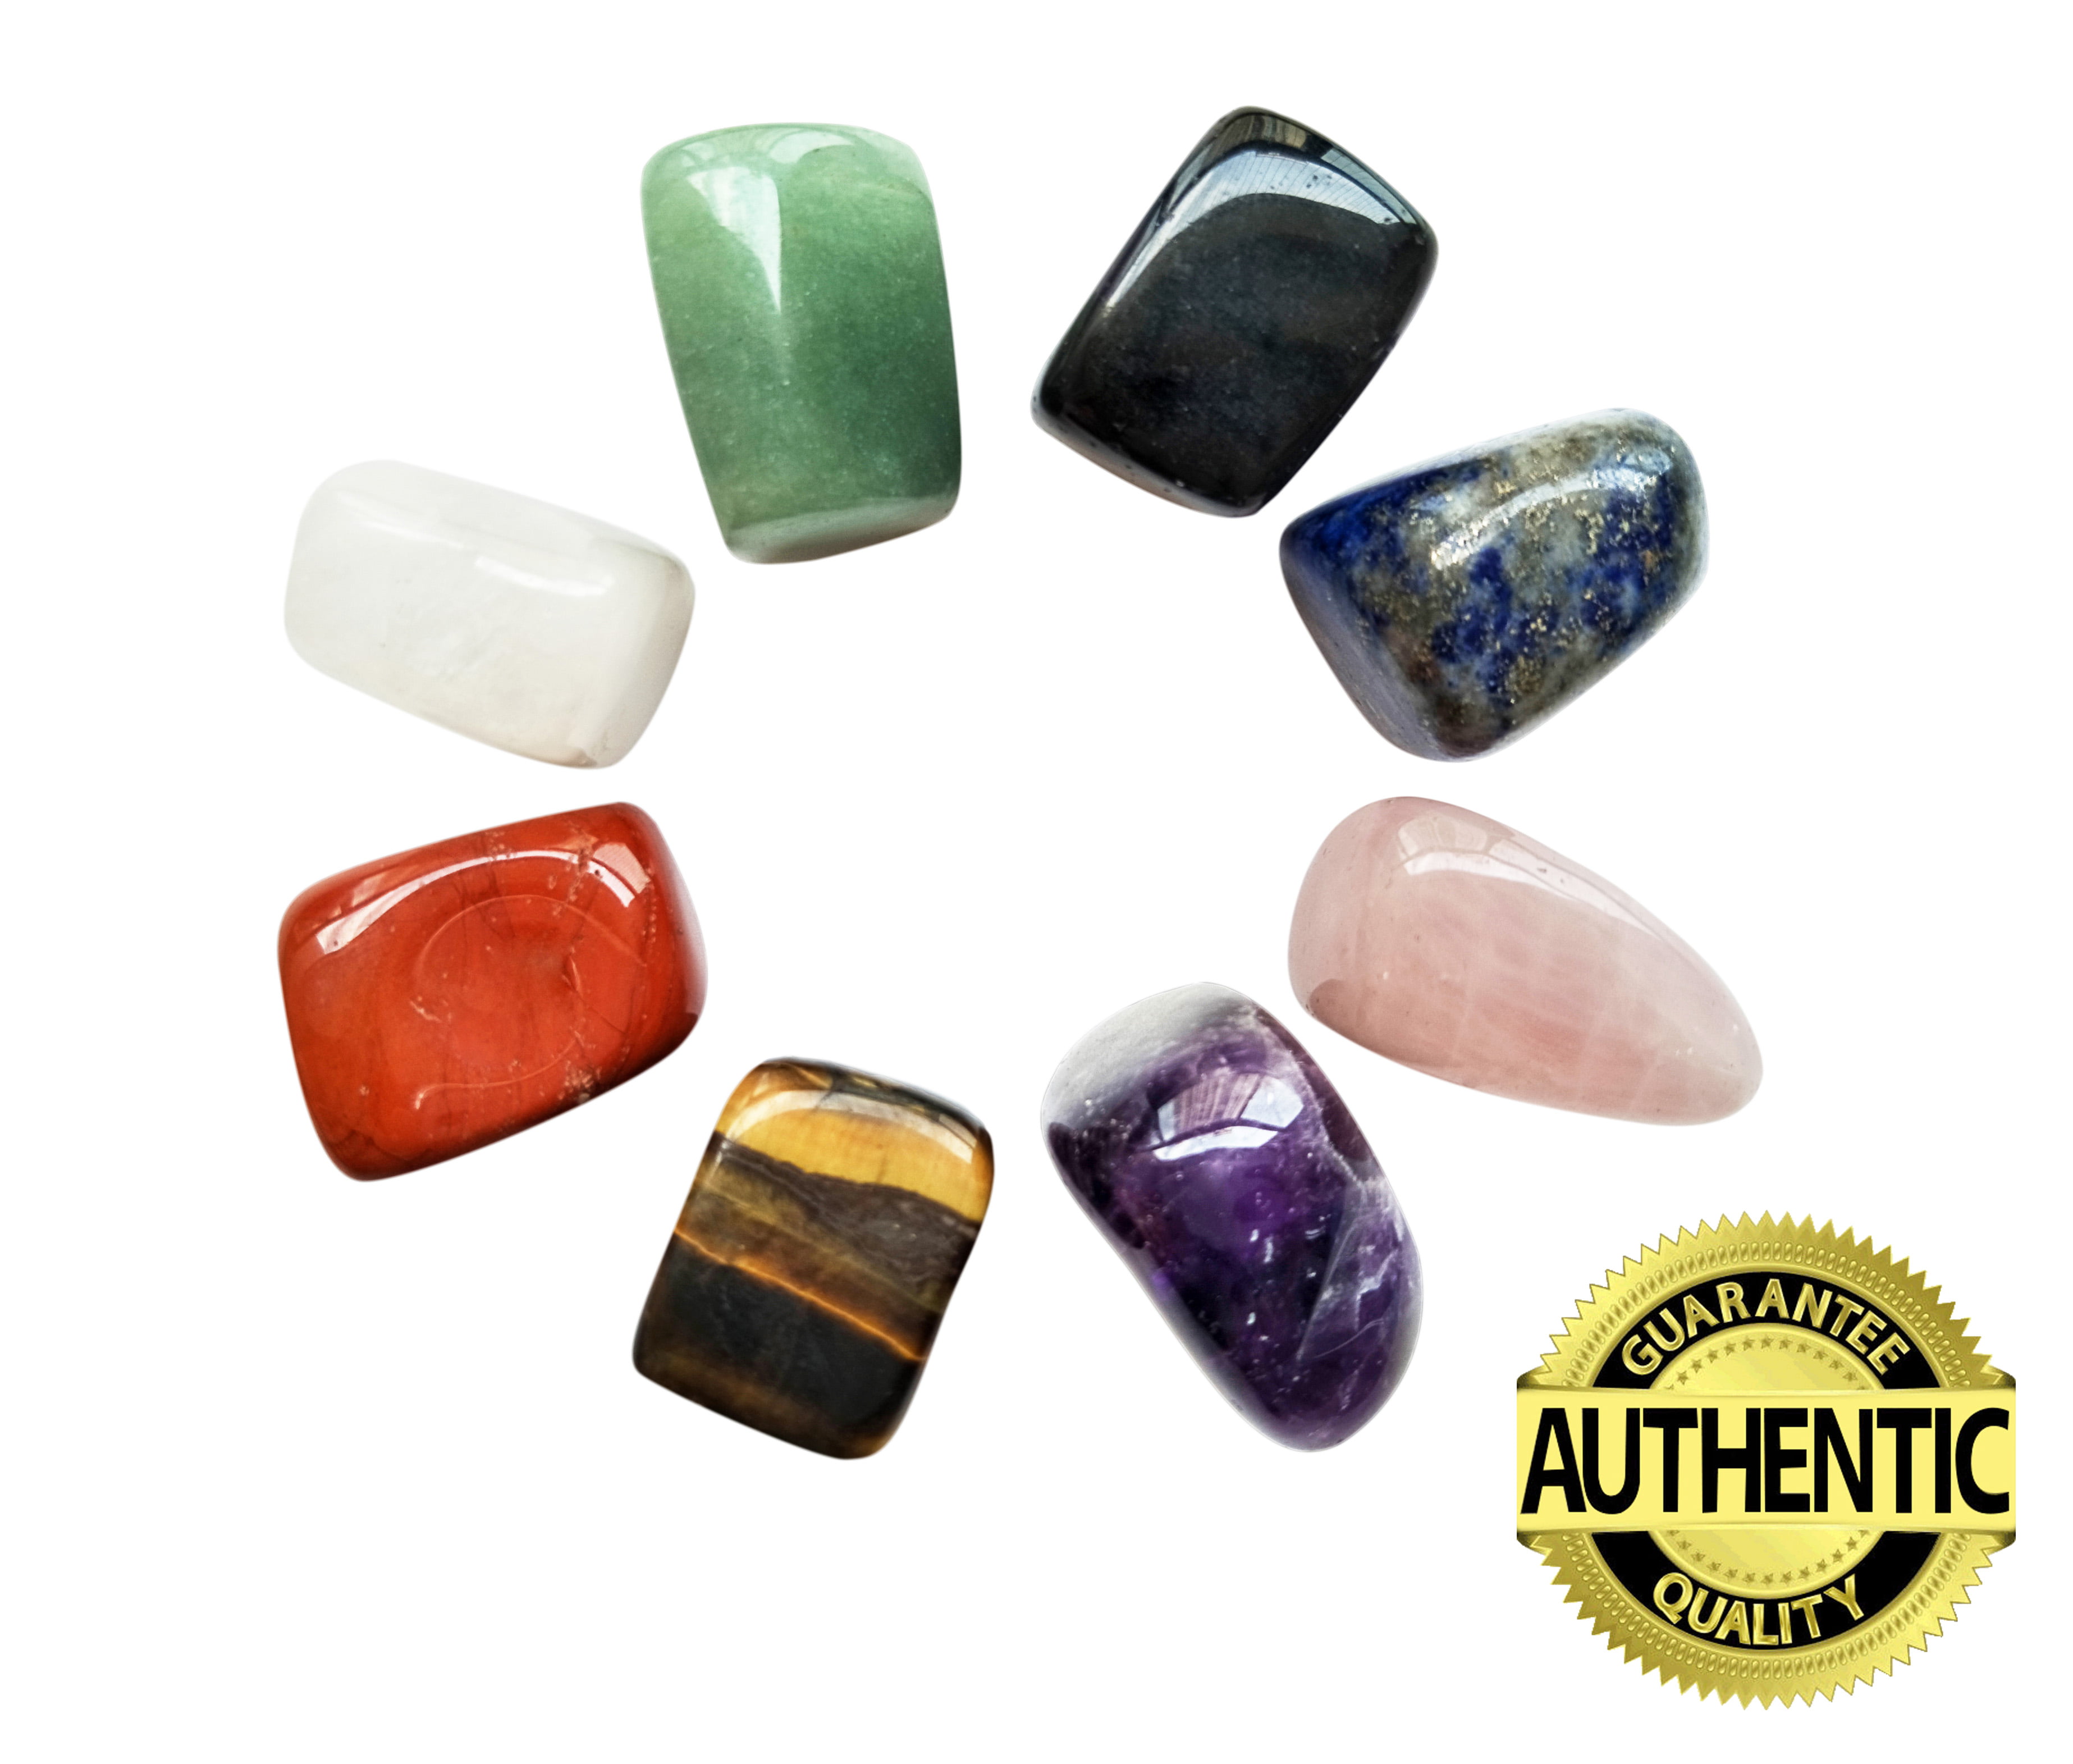 Worry Stones Hot Spa Rock & Massage Stones in Grounding Balancing Soothing Meditation Reiki for Use as 7 Chakra Stones Healing Crystals Set of 8 